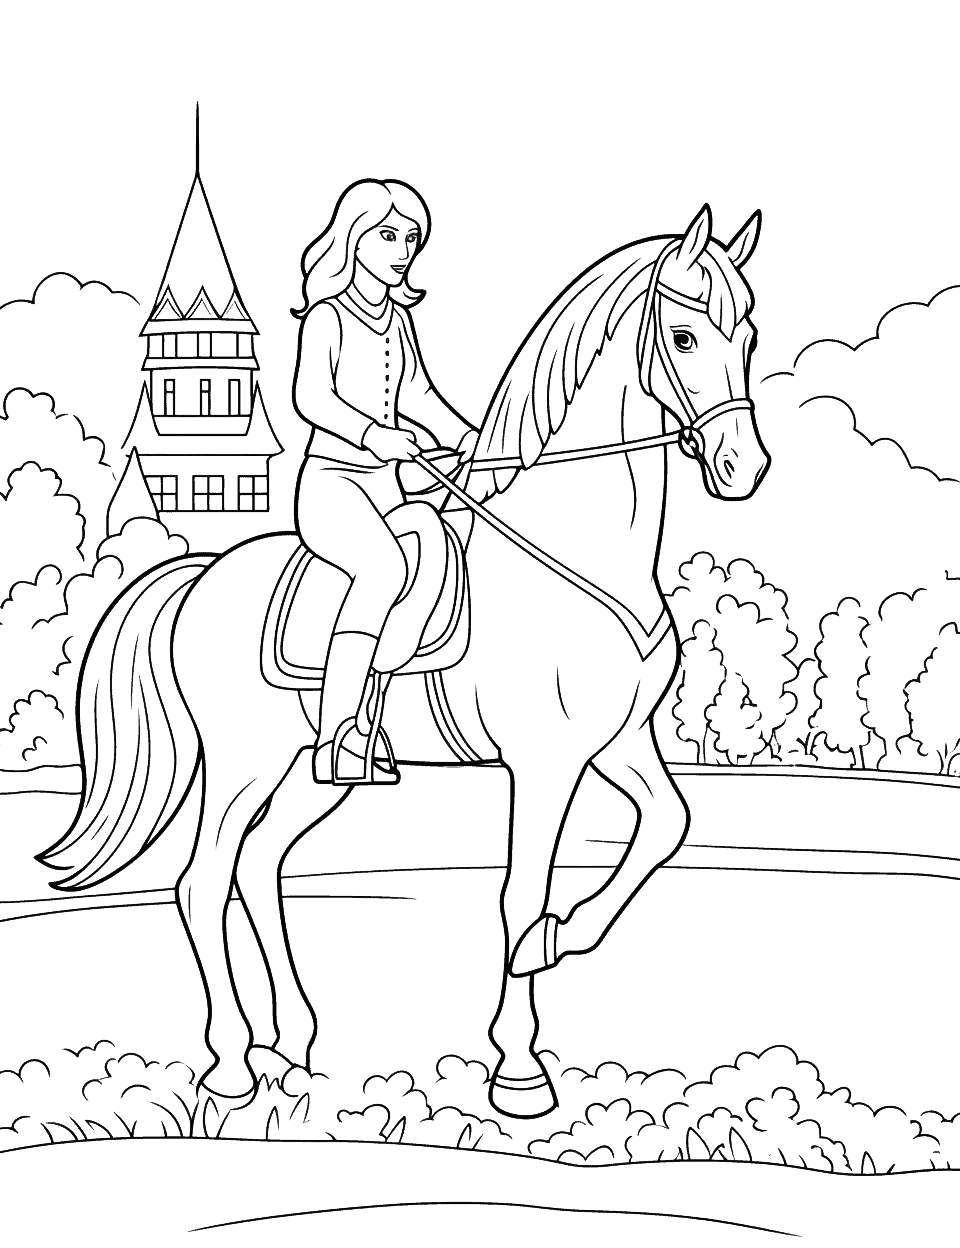 Princess Horse Riding Coloring Page - A princess riding her horse in the royal gardens.